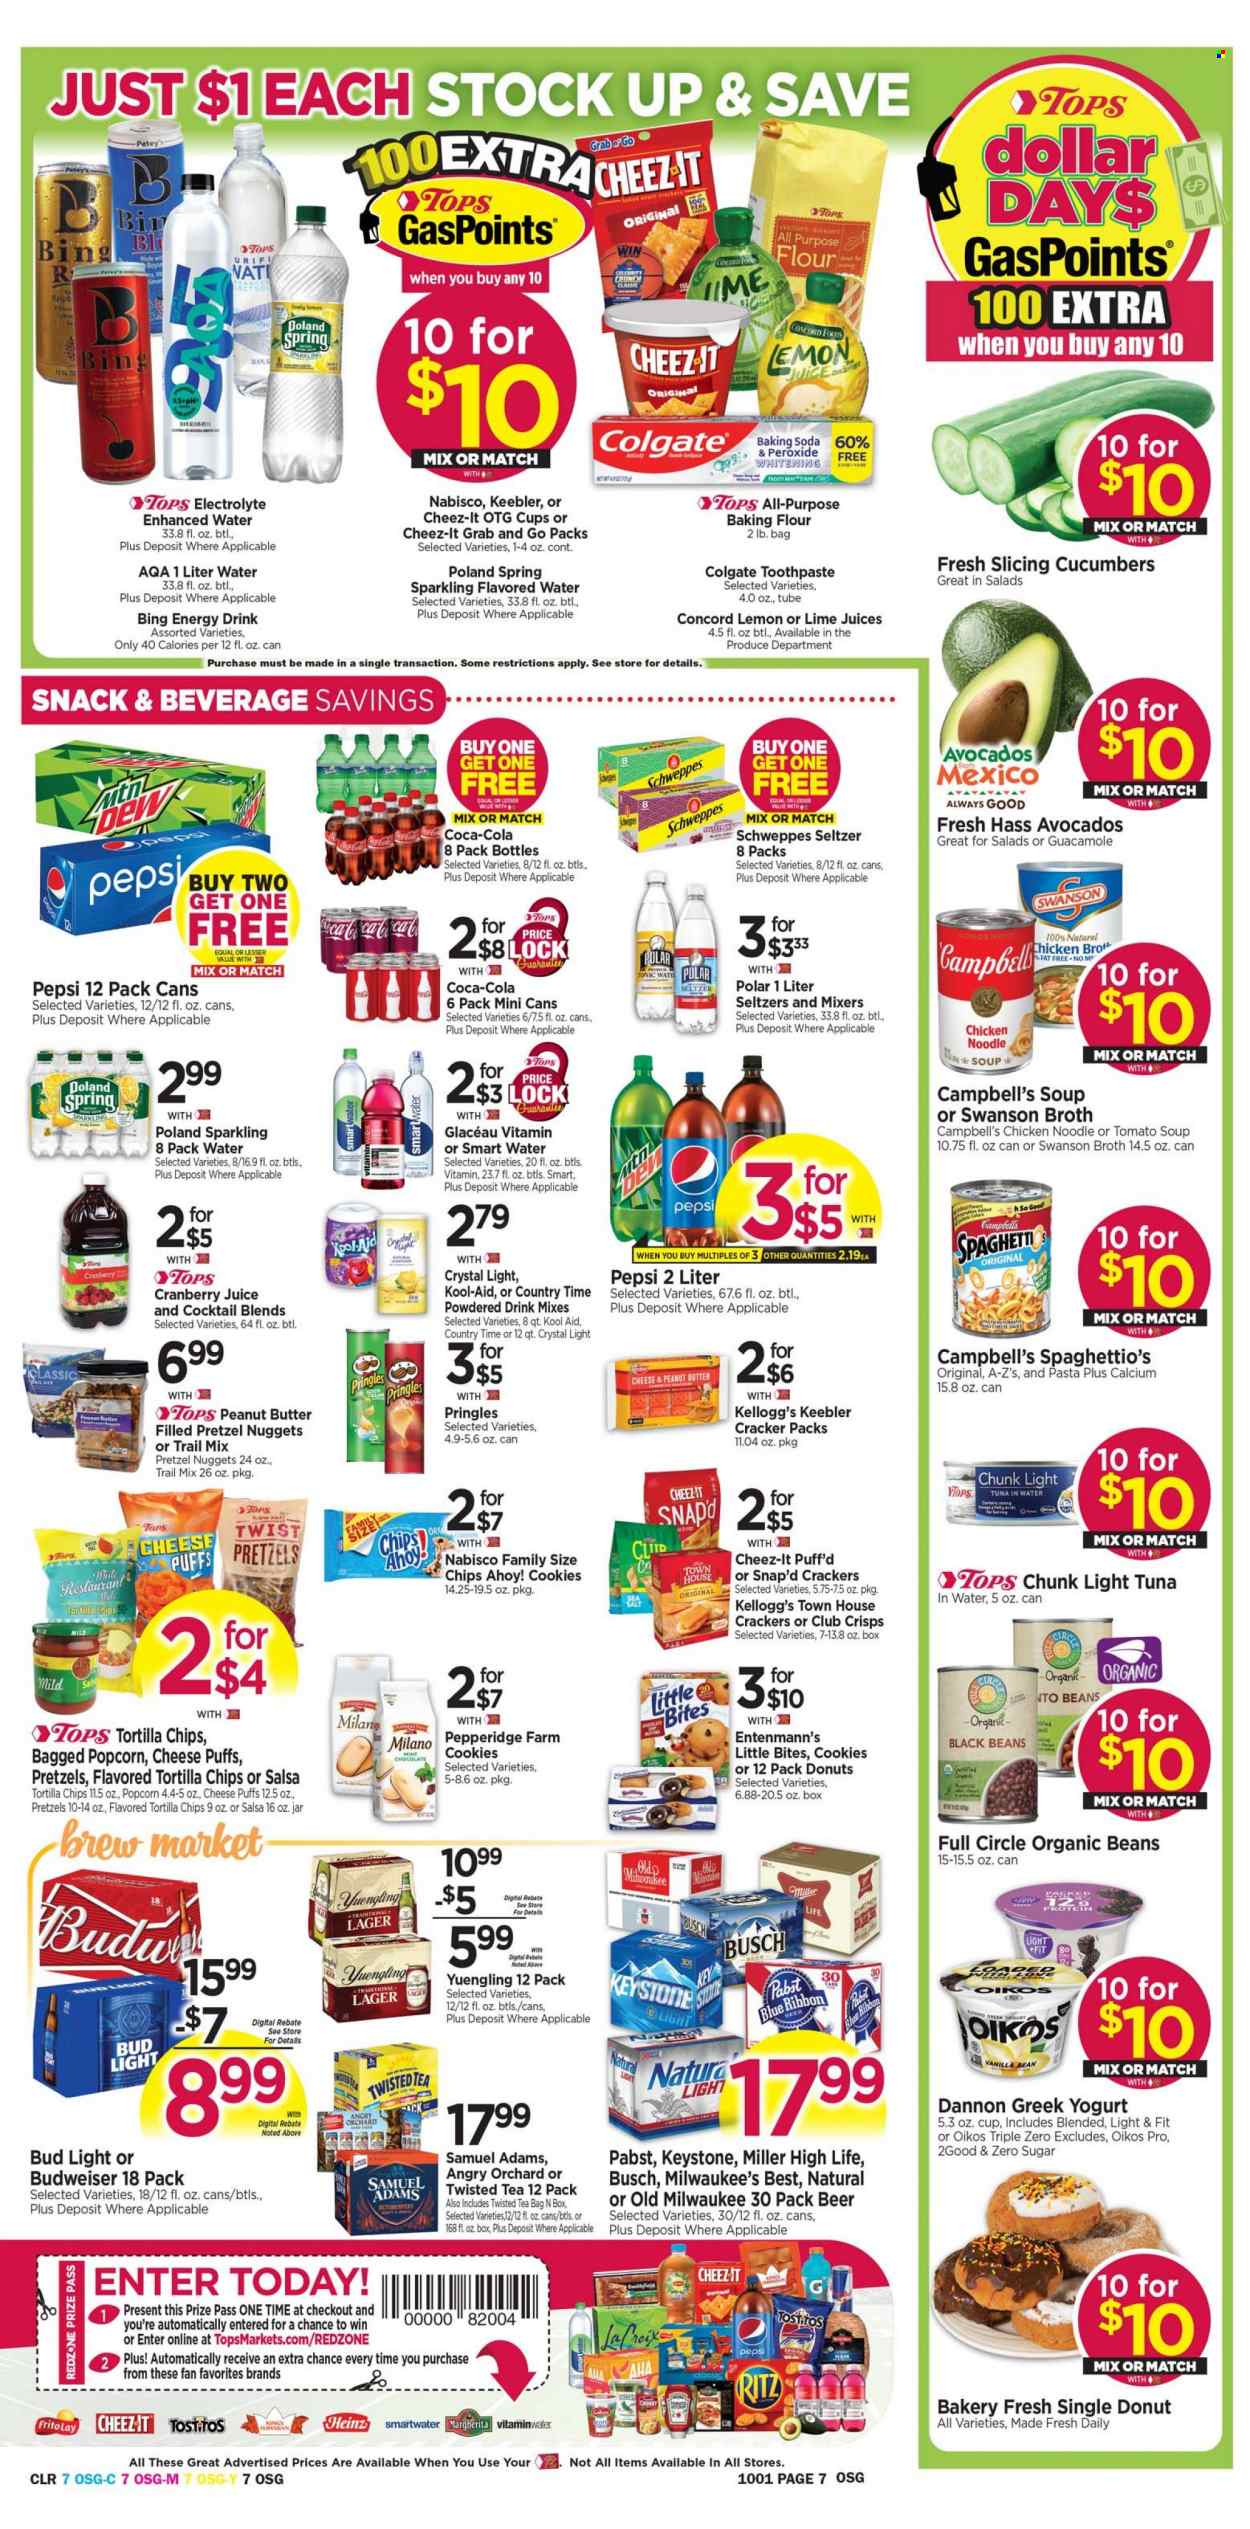 thumbnail - Tops Flyer - 09/25/2022 - 10/01/2022 - Sales products - pretzels, puffs, donut, Entenmann's, cucumber, tuna, Campbell's, spaghetti, tomato soup, soup, nuggets, noodles cup, noodles, ham, guacamole, greek yoghurt, yoghurt, Oikos, Dannon, cookies, chocolate, snack, crackers, Kellogg's, Chips Ahoy!, Little Bites, Keebler, RITZ, tortilla chips, Pringles, chips, popcorn, Cheez-It, all purpose flour, bicarbonate of soda, broth, black beans, tuna in water, Heinz, light tuna, salsa, peanut butter, trail mix, Coca-Cola, cranberry juice, Schweppes, Pepsi, energy drink, tonic, Country Time, seltzer water, flavored water, Smartwater, lemon juice, powder drink, tea bags, beer, Busch, Bud Light, Miller, Lager, Keystone, Pabst Blue Ribbon, Colgate, toothpaste, Budweiser, Twisted Tea, Yuengling. Page 7.